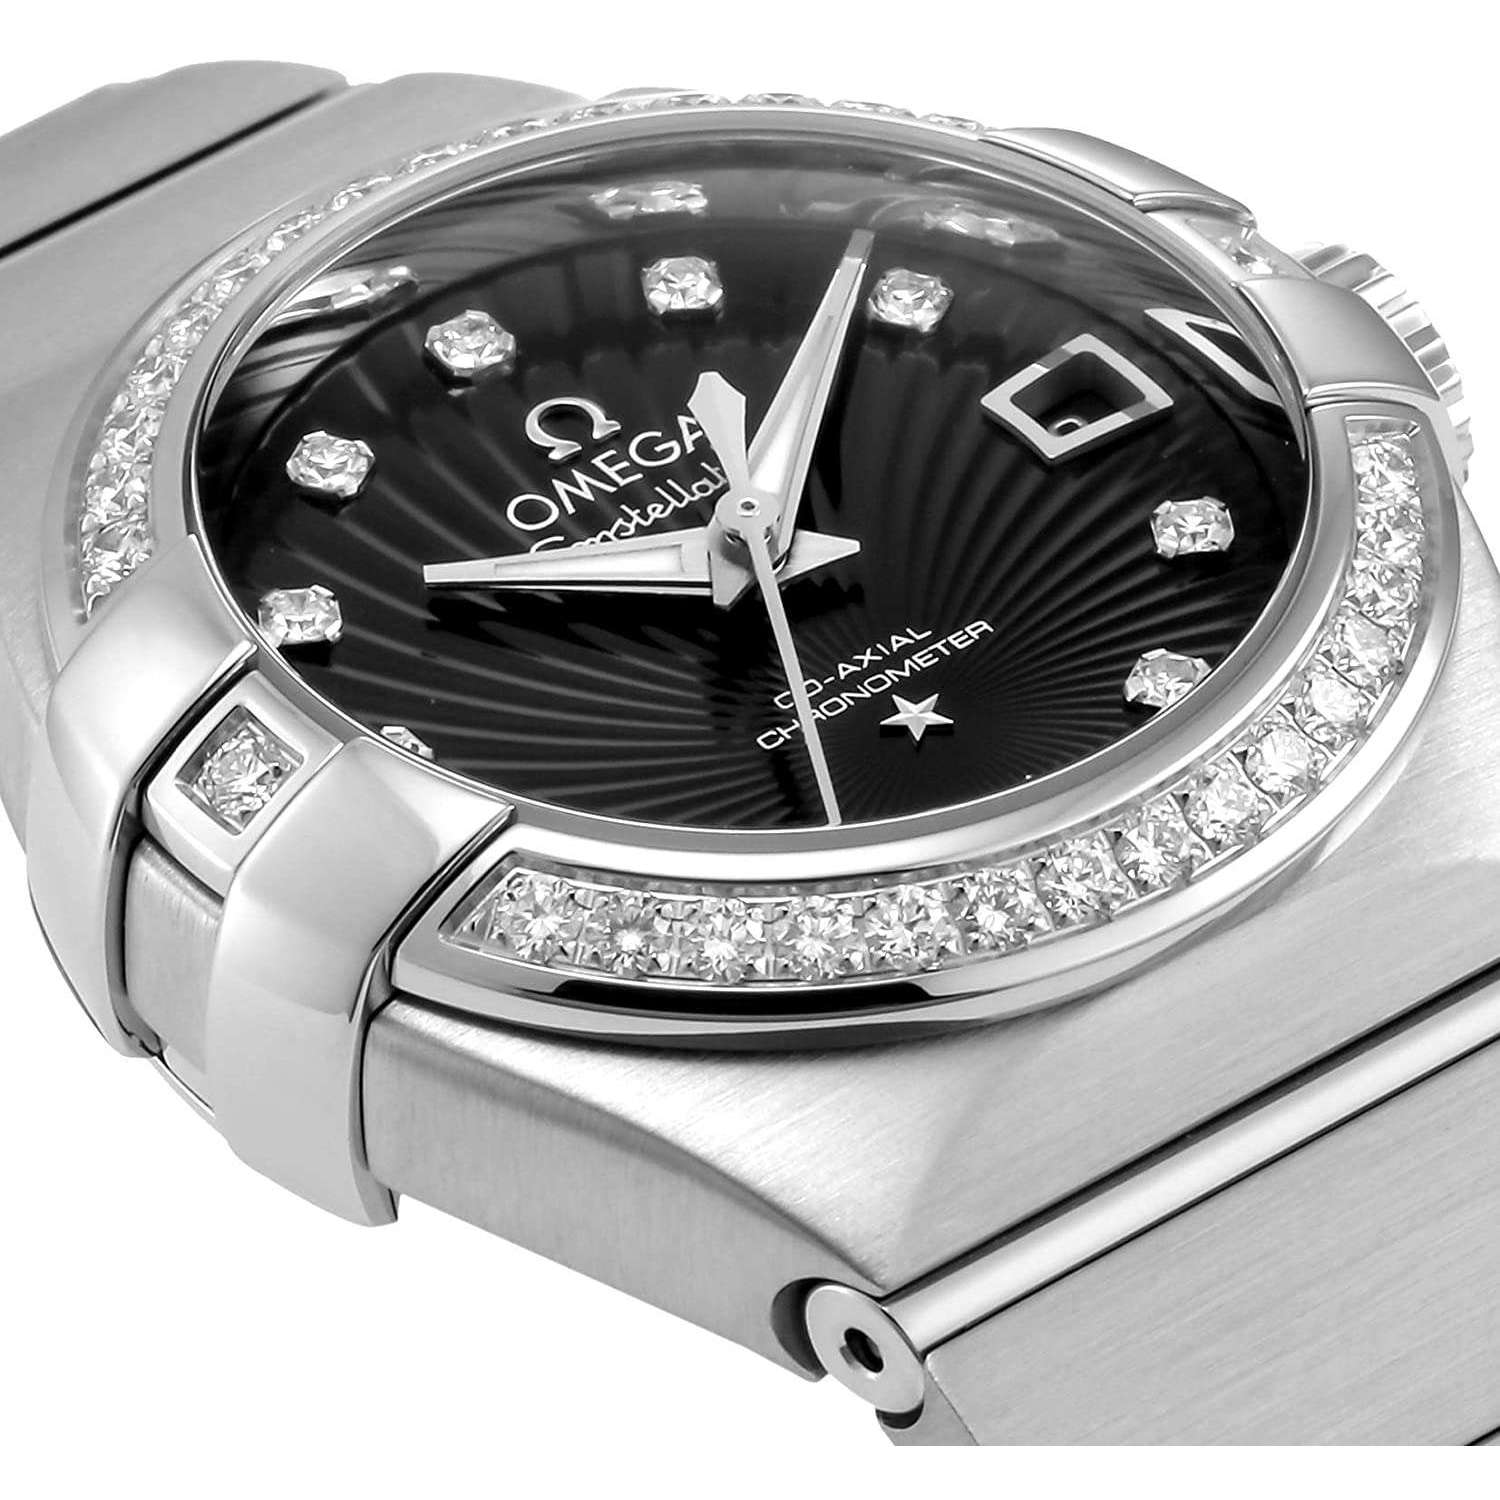 ROOK JAPAN:OMEGA CONSTELLATION CO‑AXIAL CHRONOMETER 27 MM WOMEN WATCH 123.15.27.20.51.001,Luxury Watch,Omega